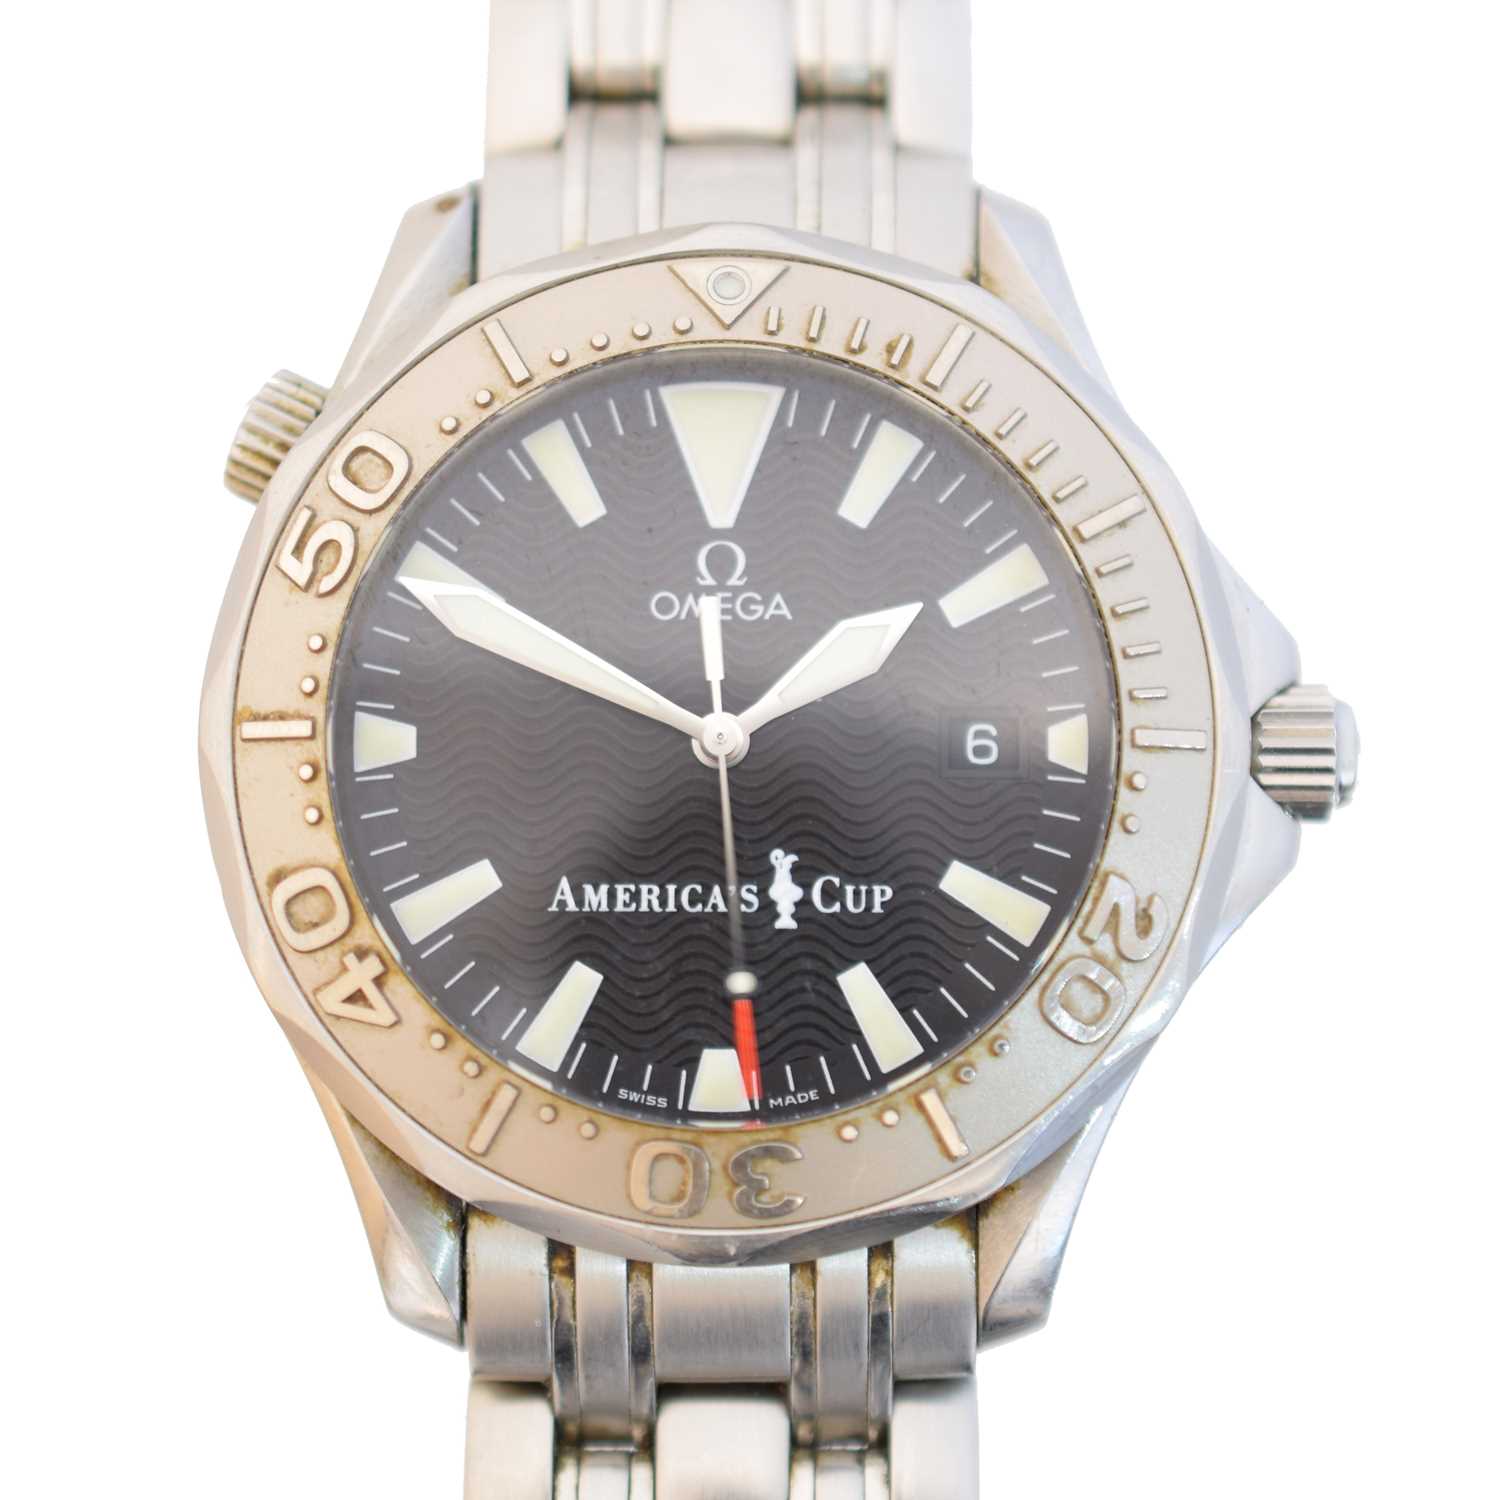 Lot 131 - A stainless steel and gold Omega Seamaster Limited Edition ‘America’s Cup’ watch